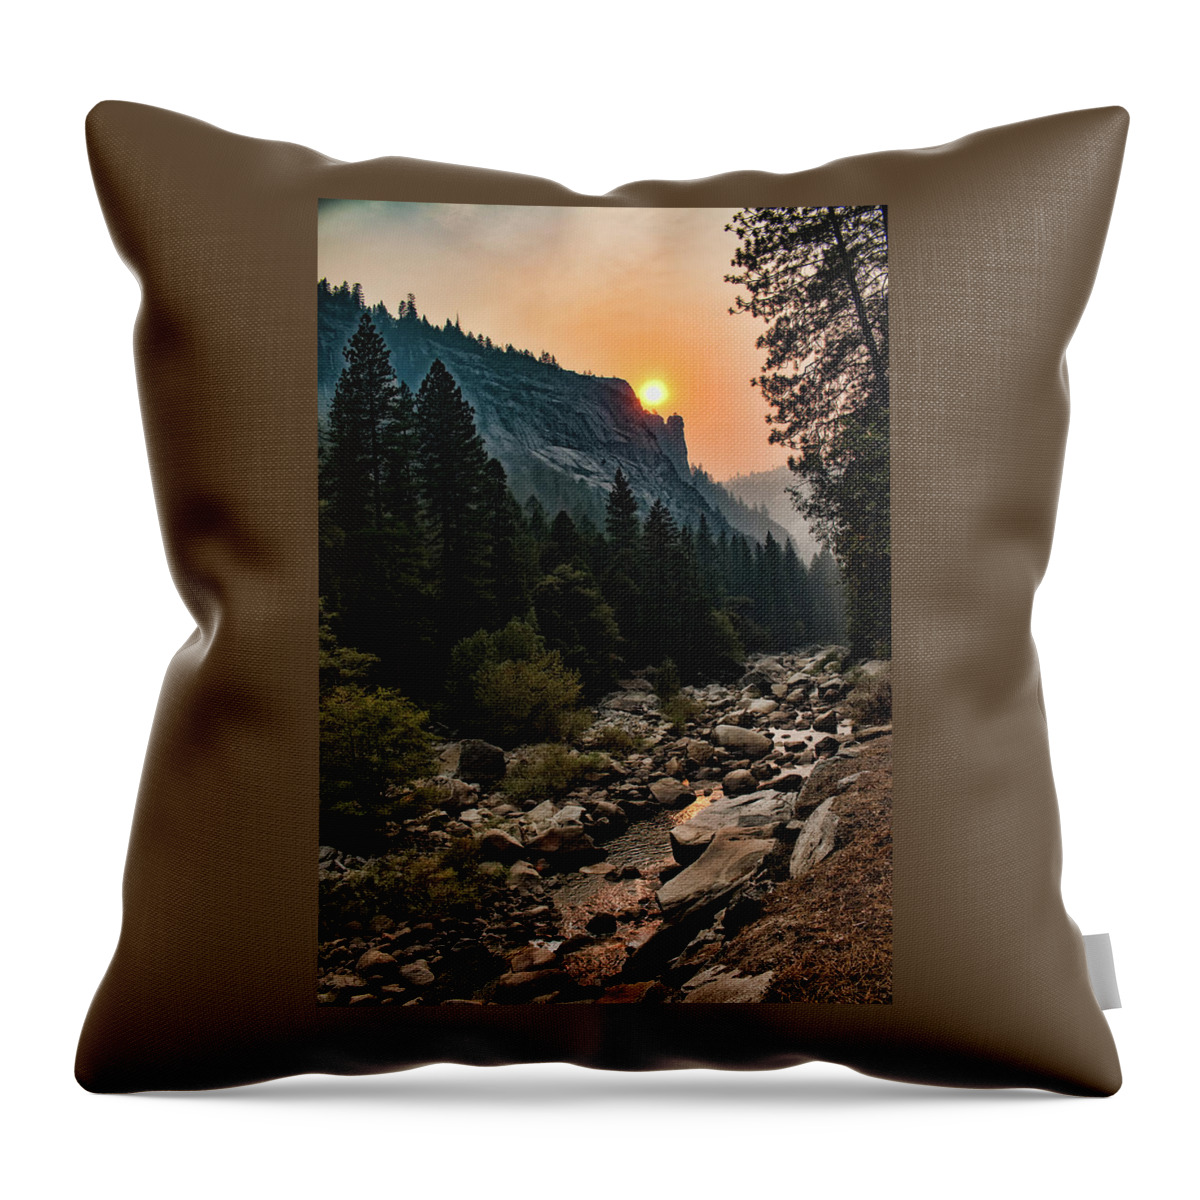 Merced River Throw Pillow featuring the photograph Evening On The Merced River by Kristia Adams